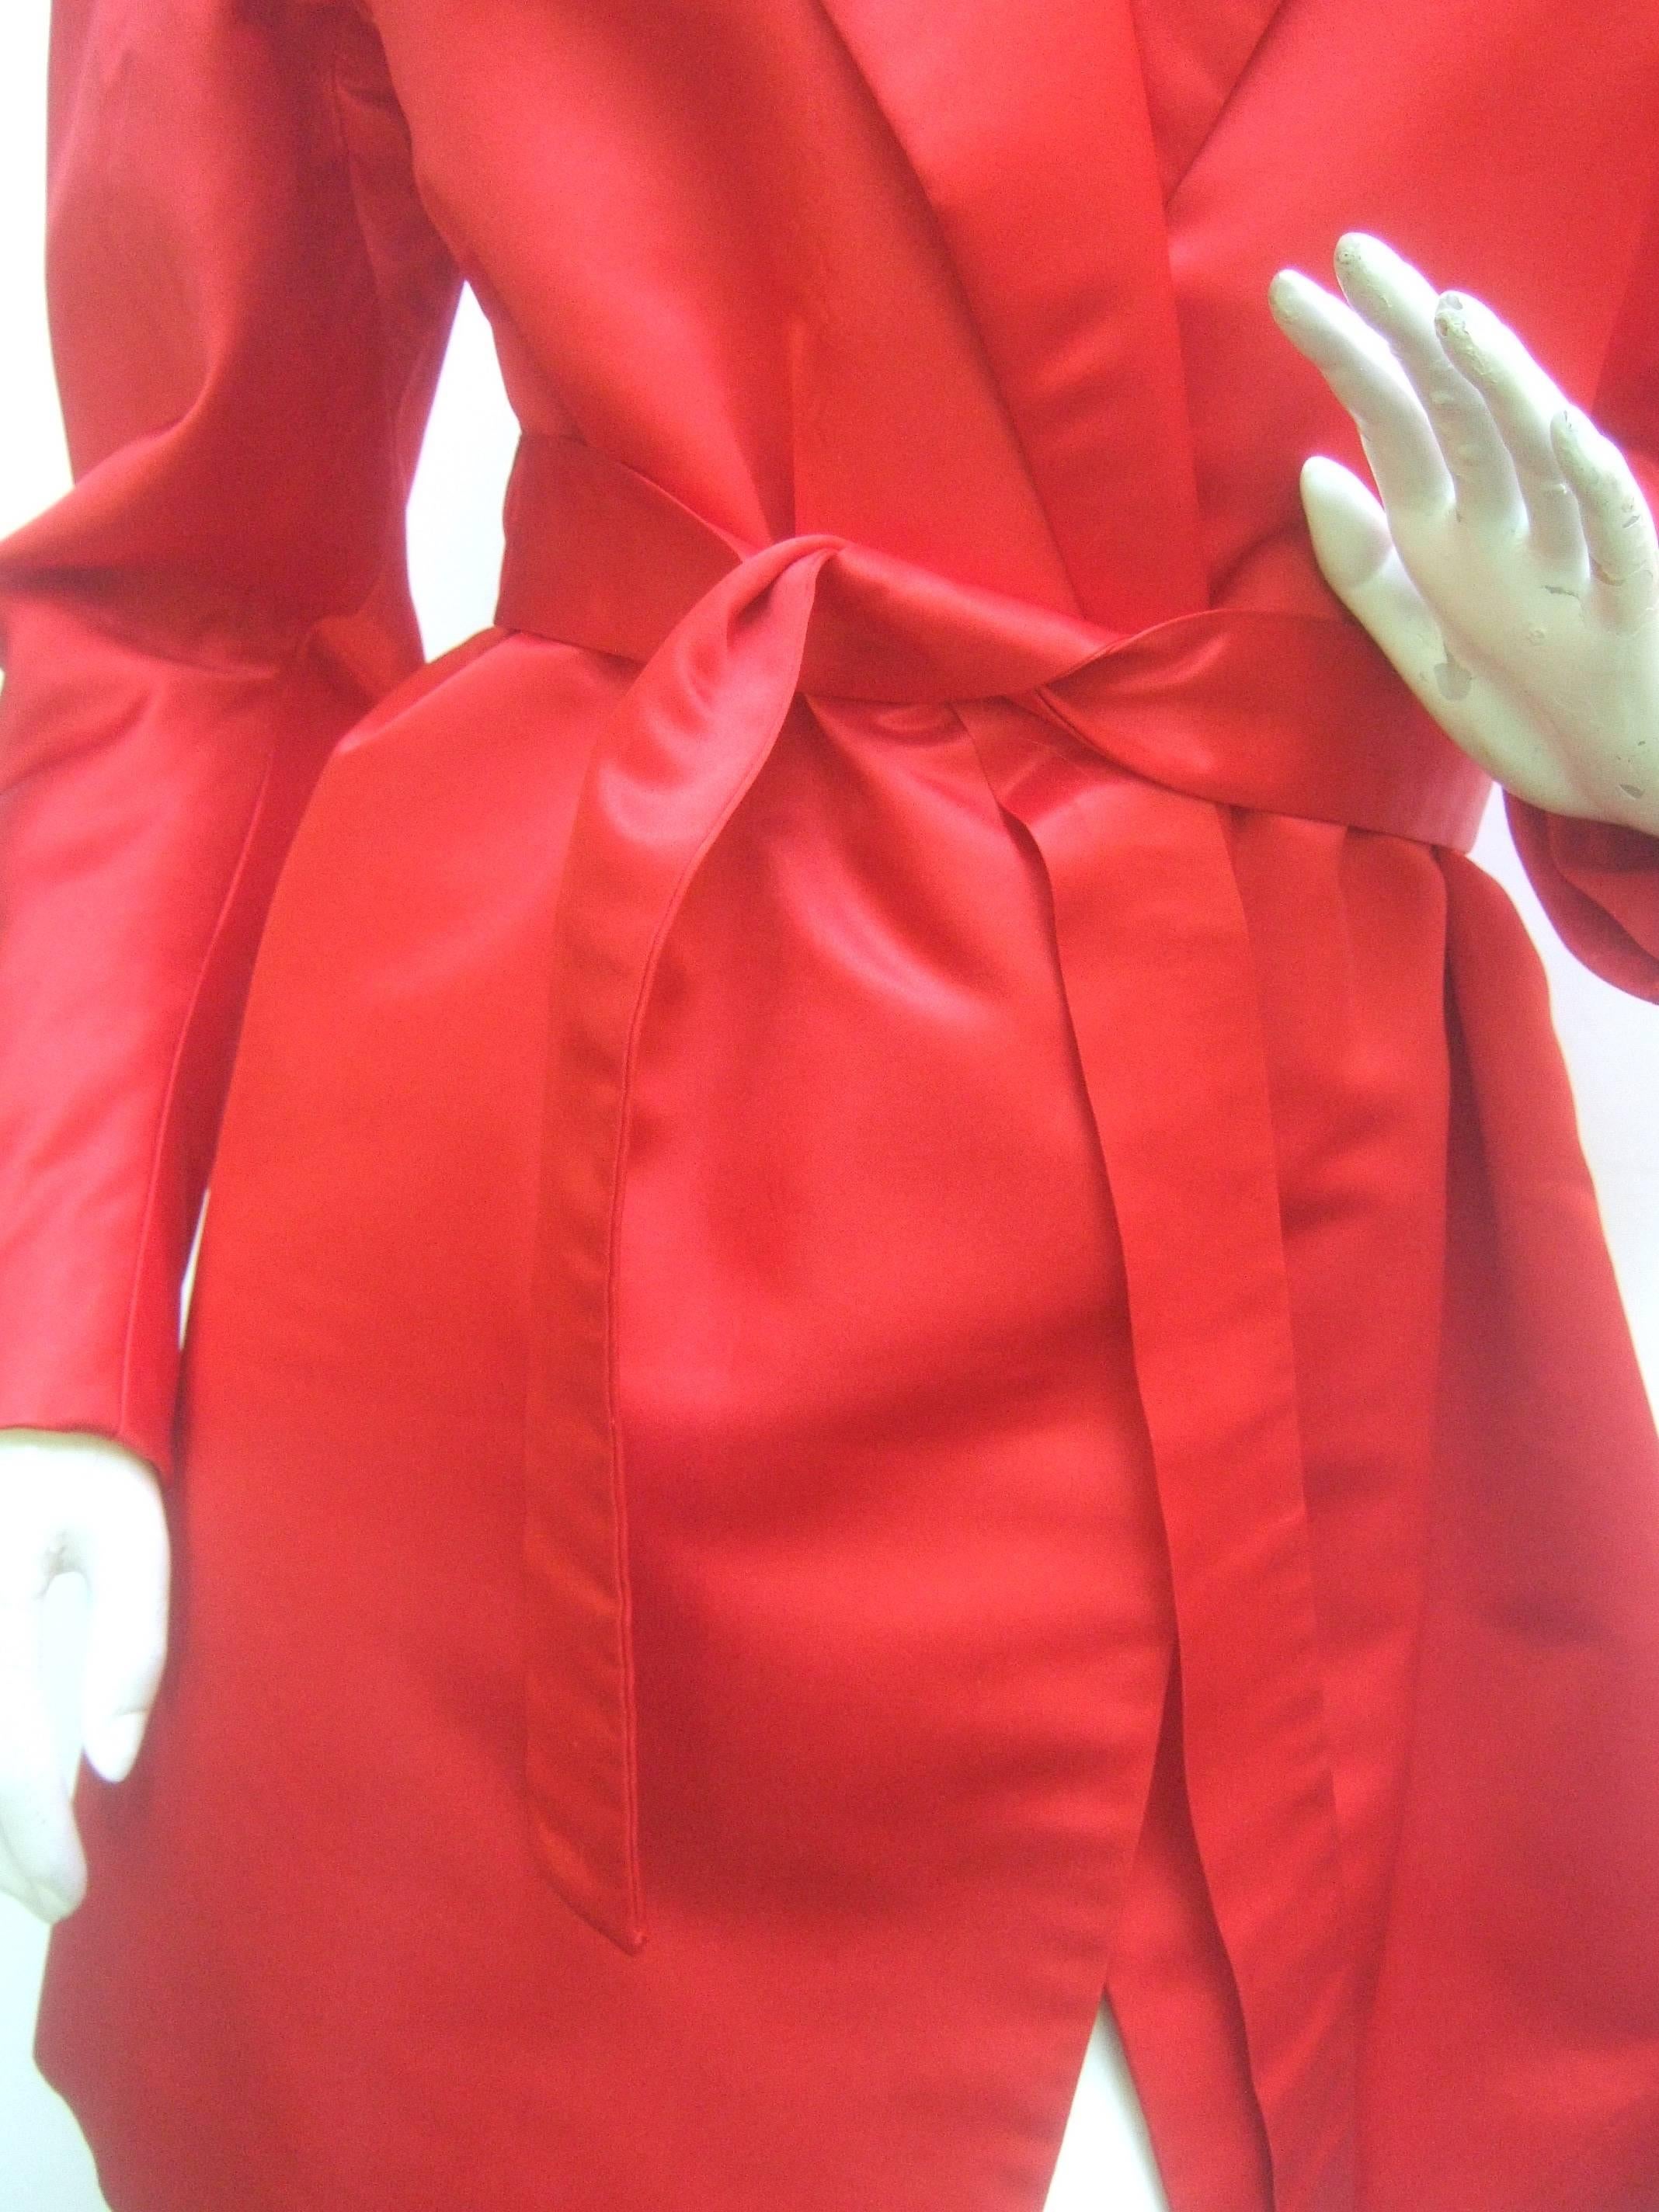 Women's or Men's Cherry Red Halston Couture Belted Satin Jacket. 1970's. Studio 54.